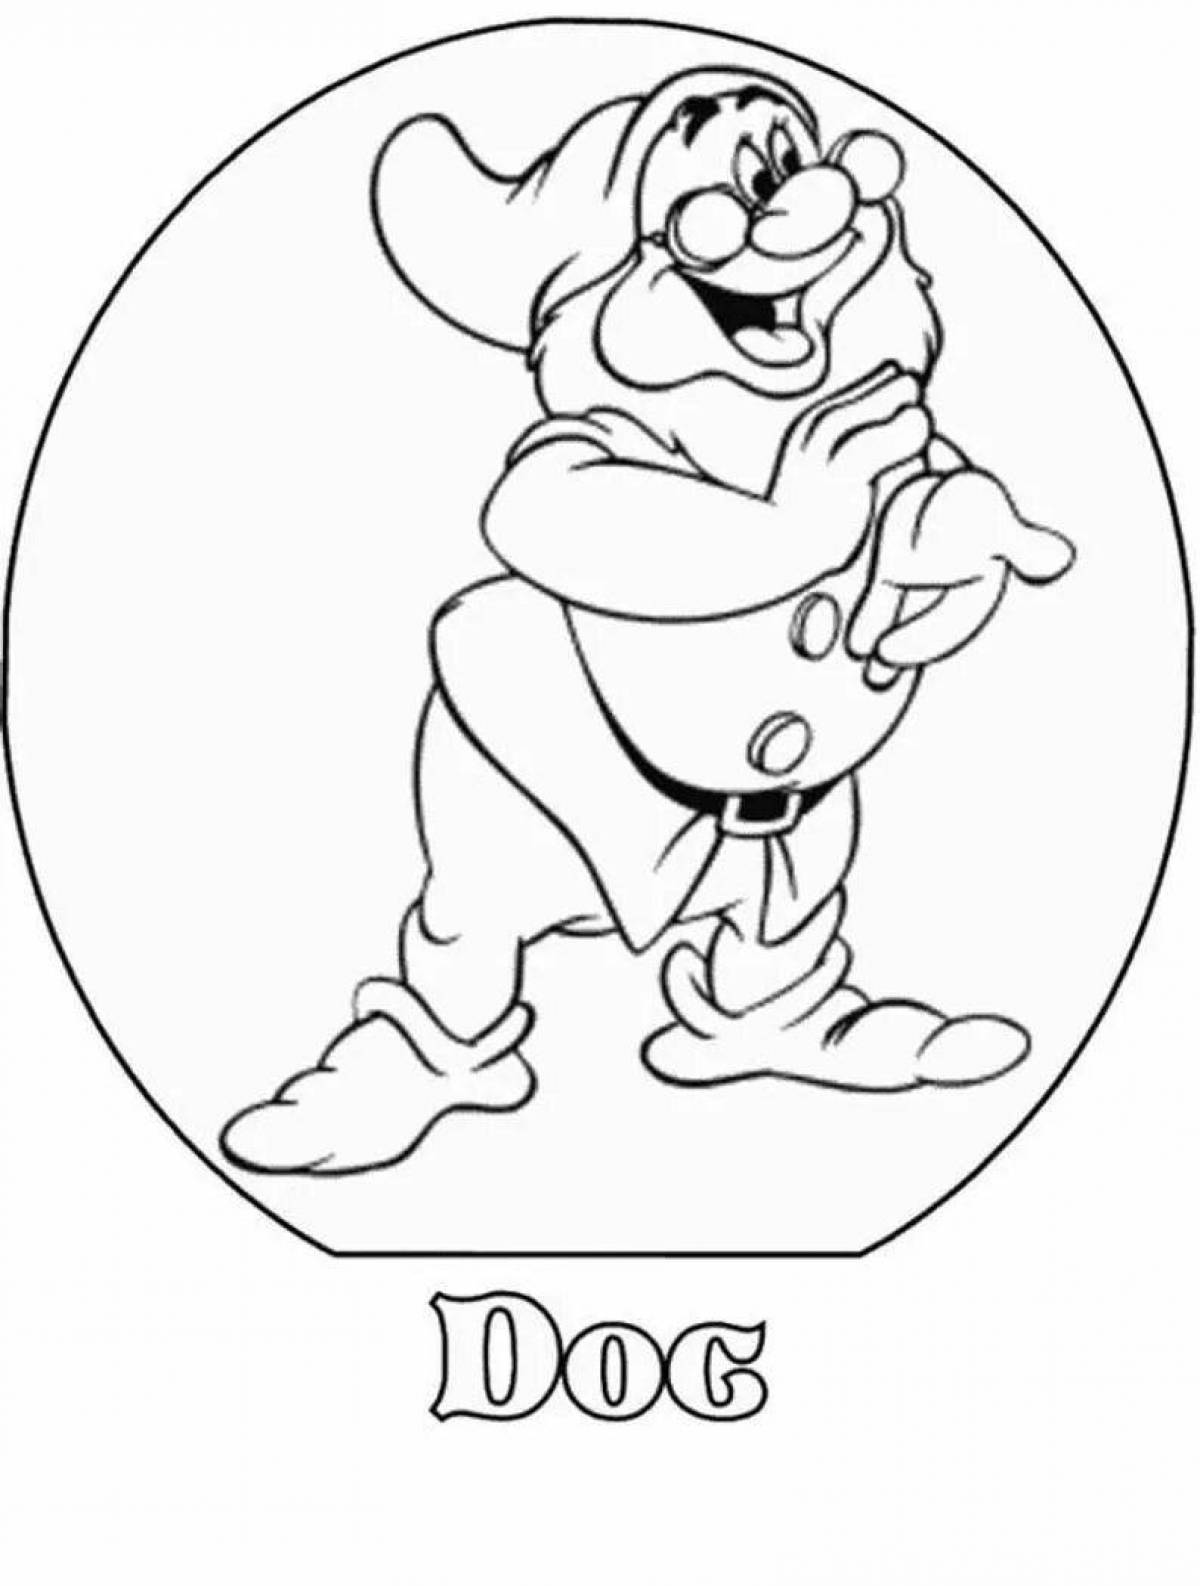 Fun disney character coloring pages